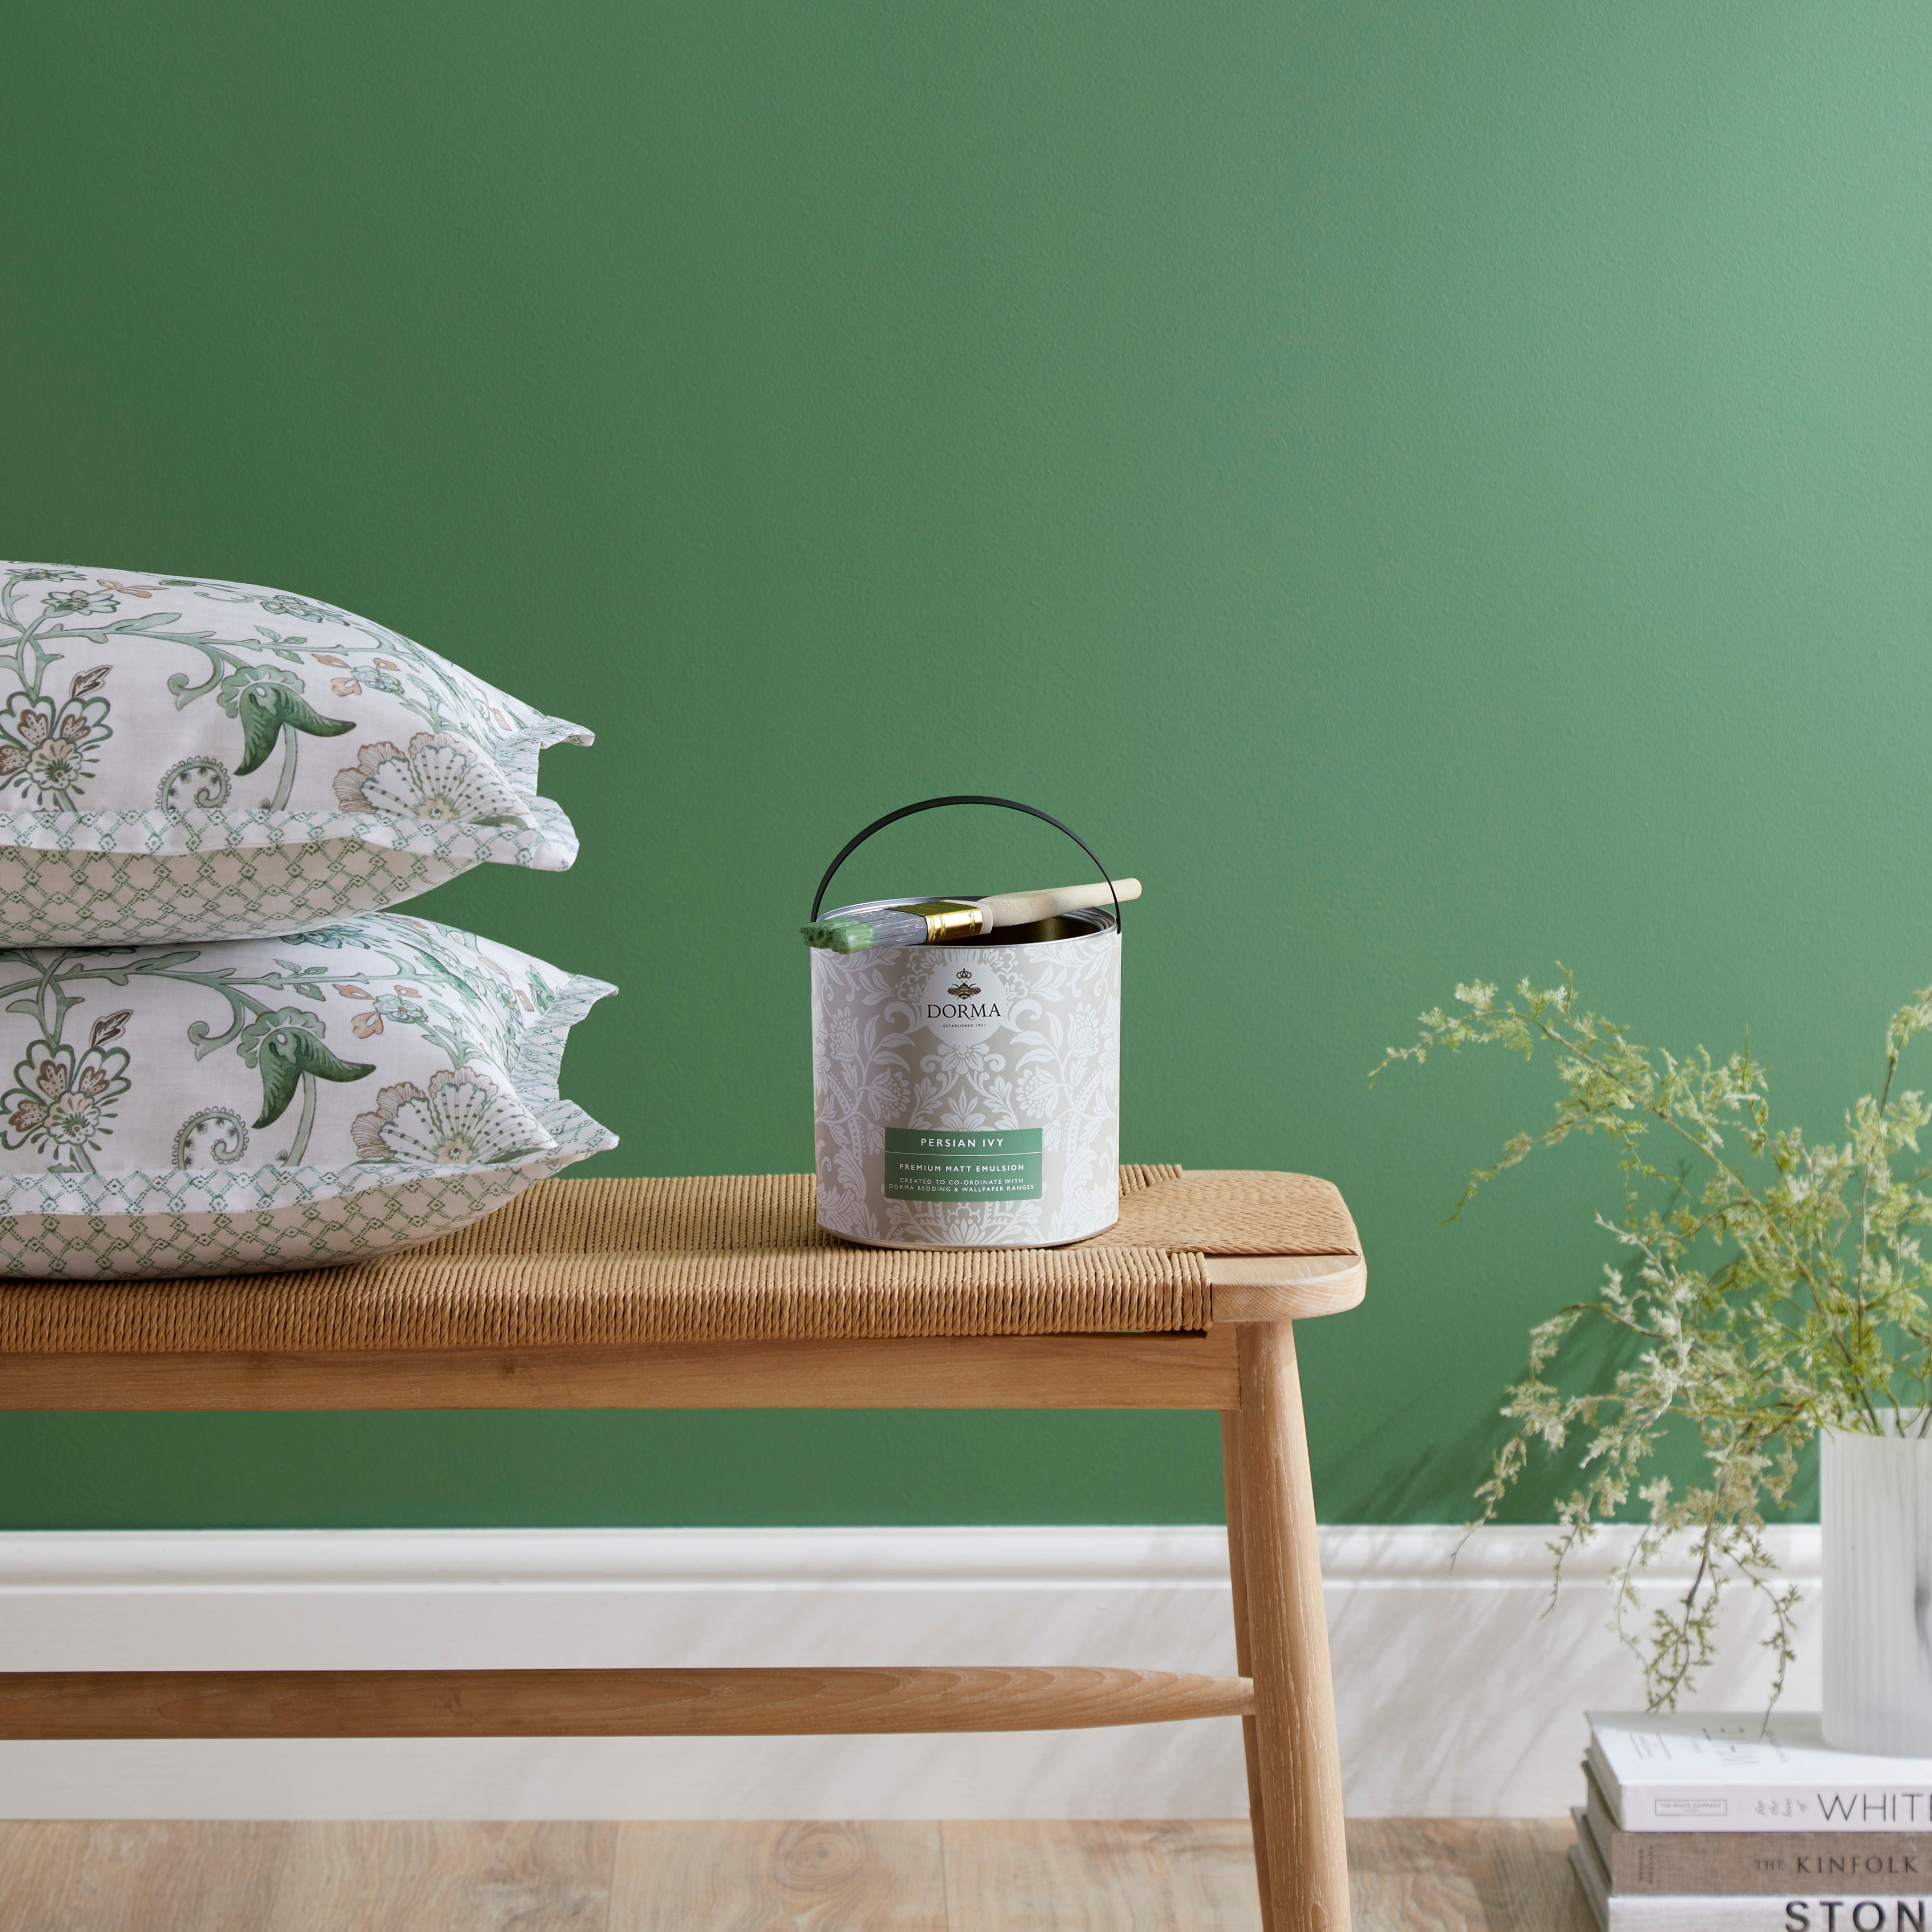 Dulux Paints - Create a spacious and airy feel in your bedroom with pale  tones like Misty Meadows. 😍